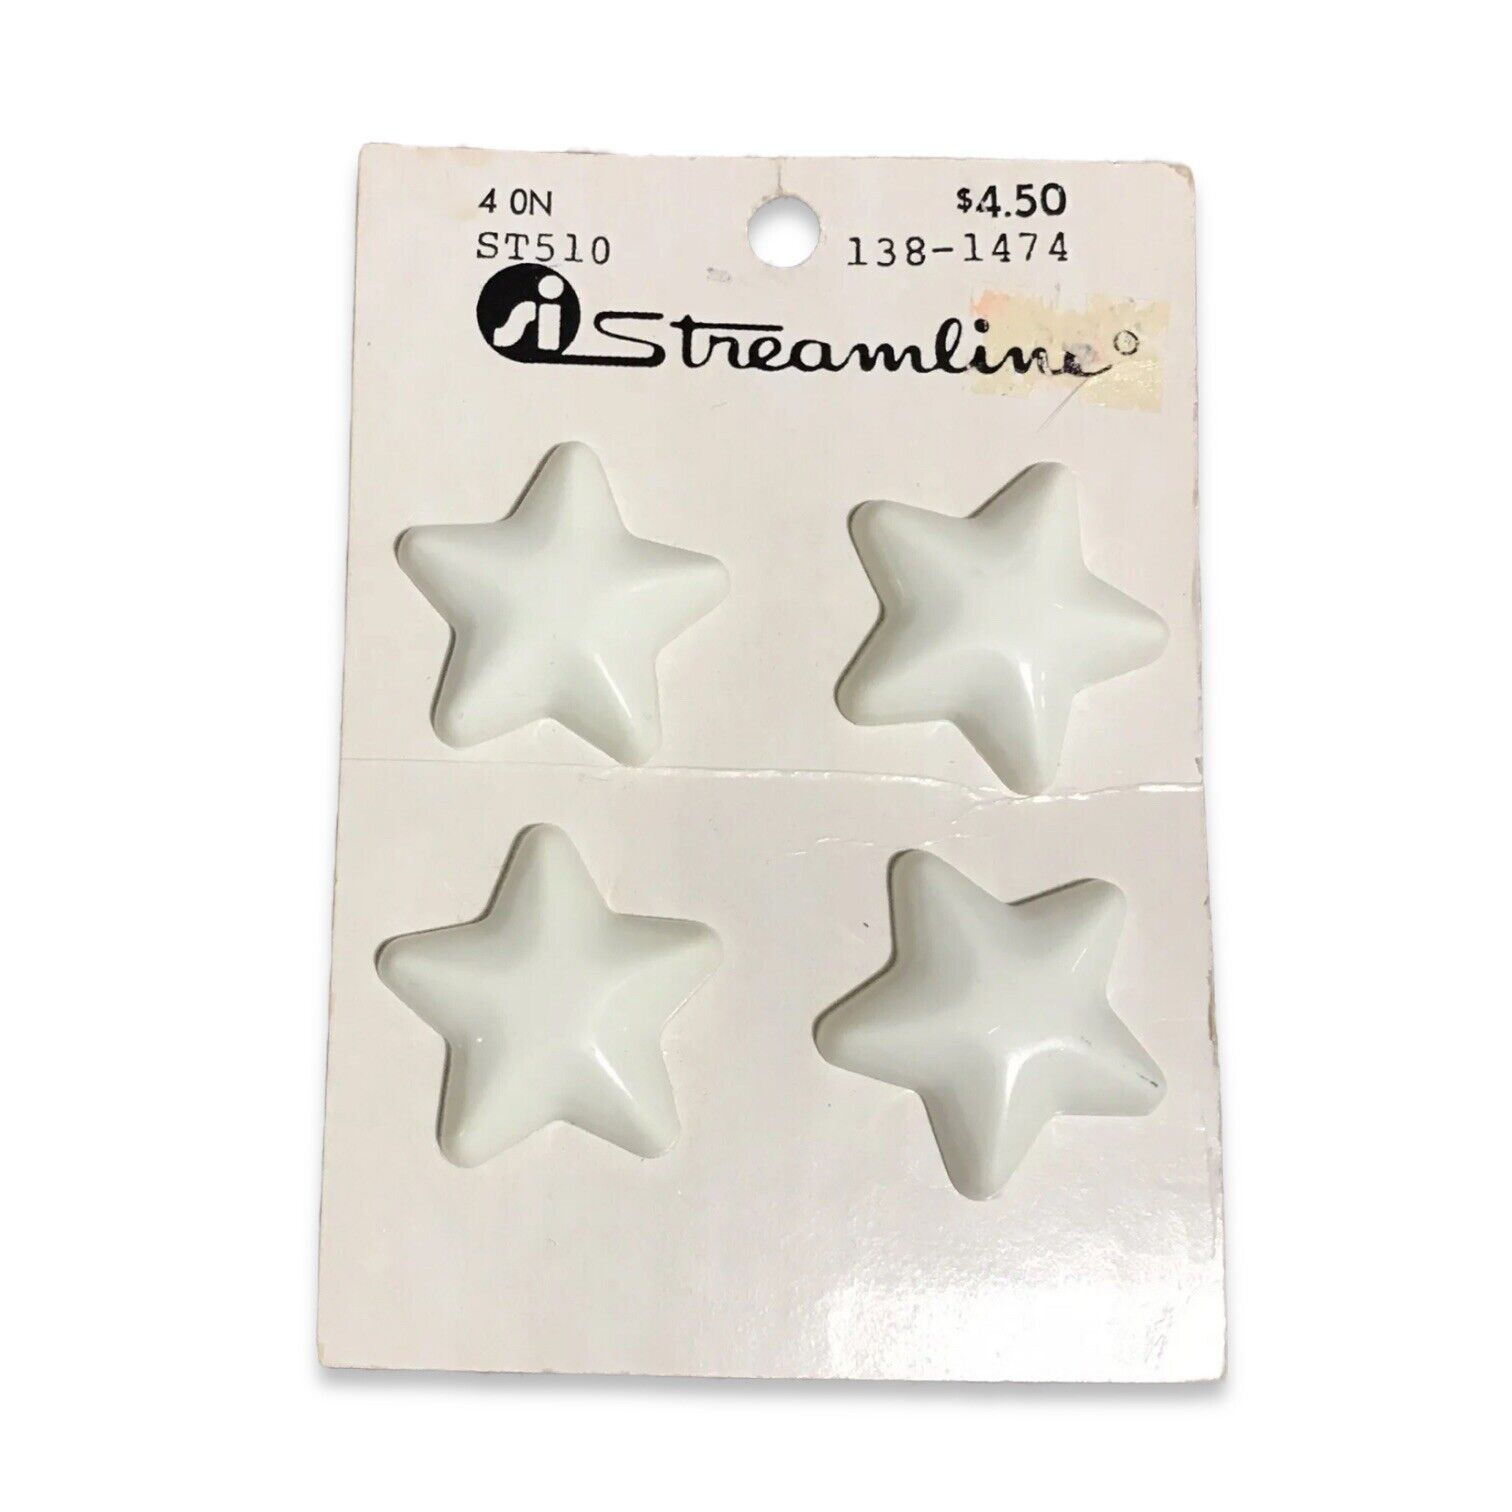 Vintage 1980s Streamline 4 Large White Star-Shaped Plastic Sew-on Shirt Buttons